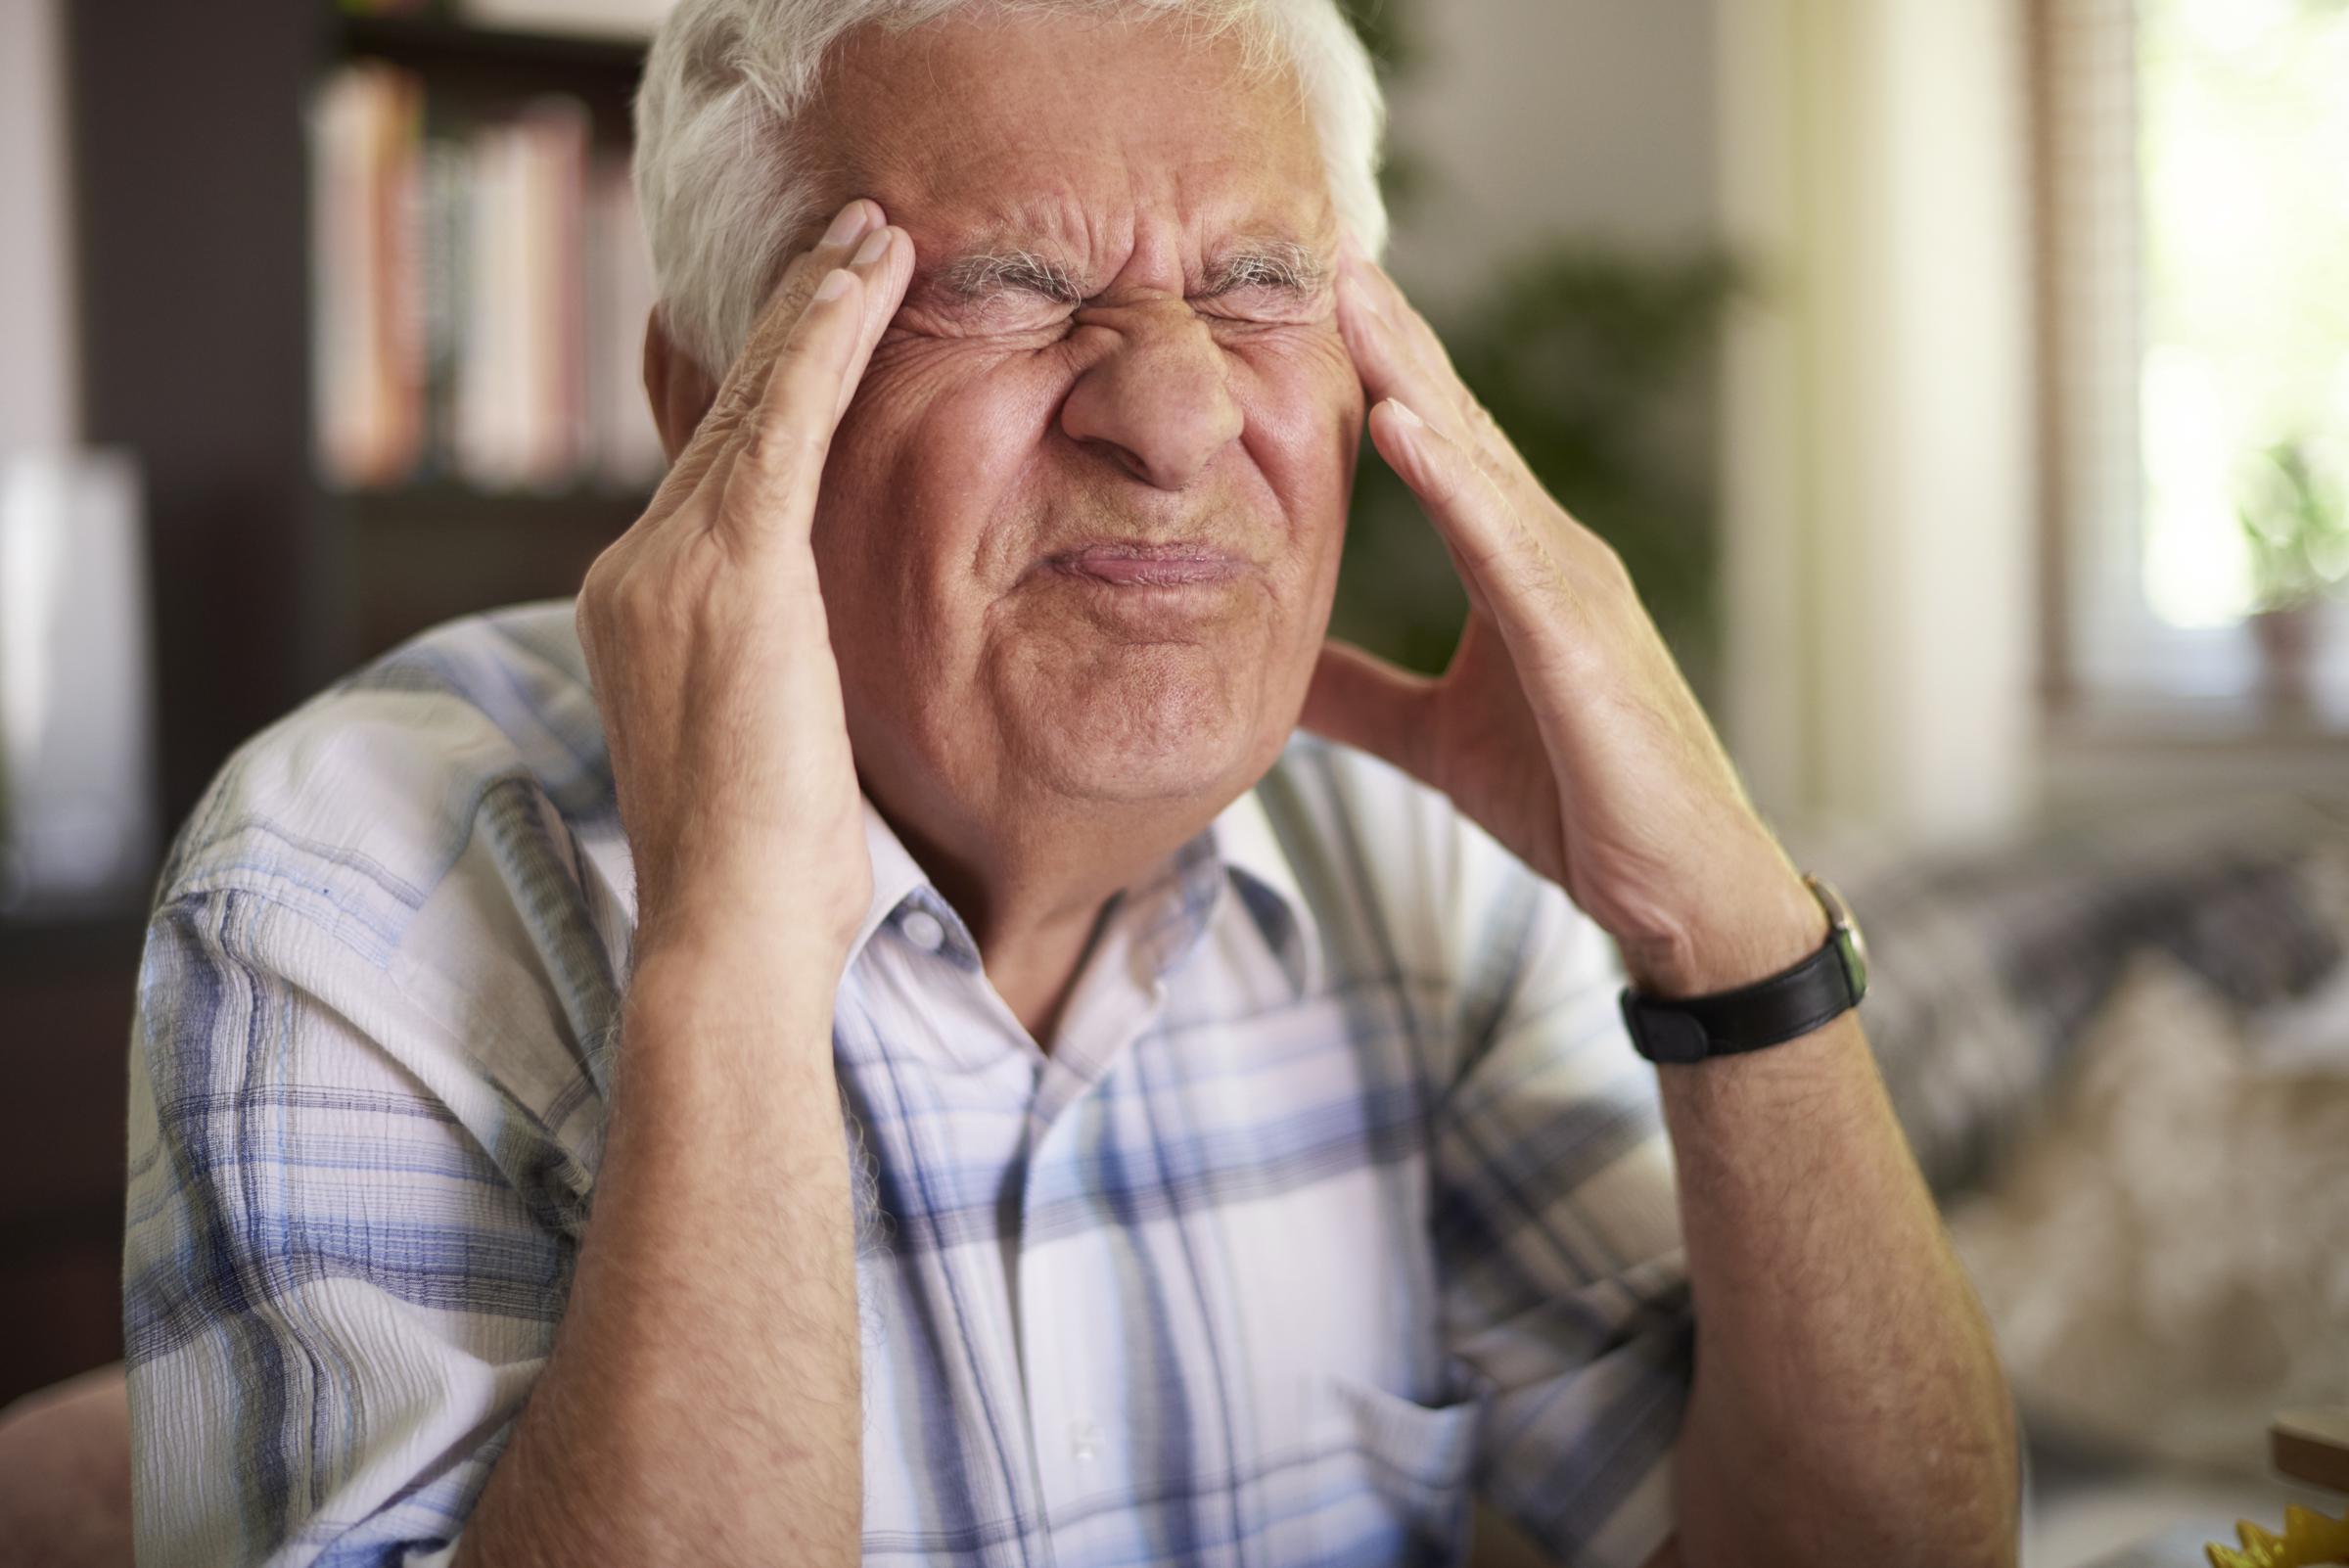 An angry older man holding his head | Source: Freepik